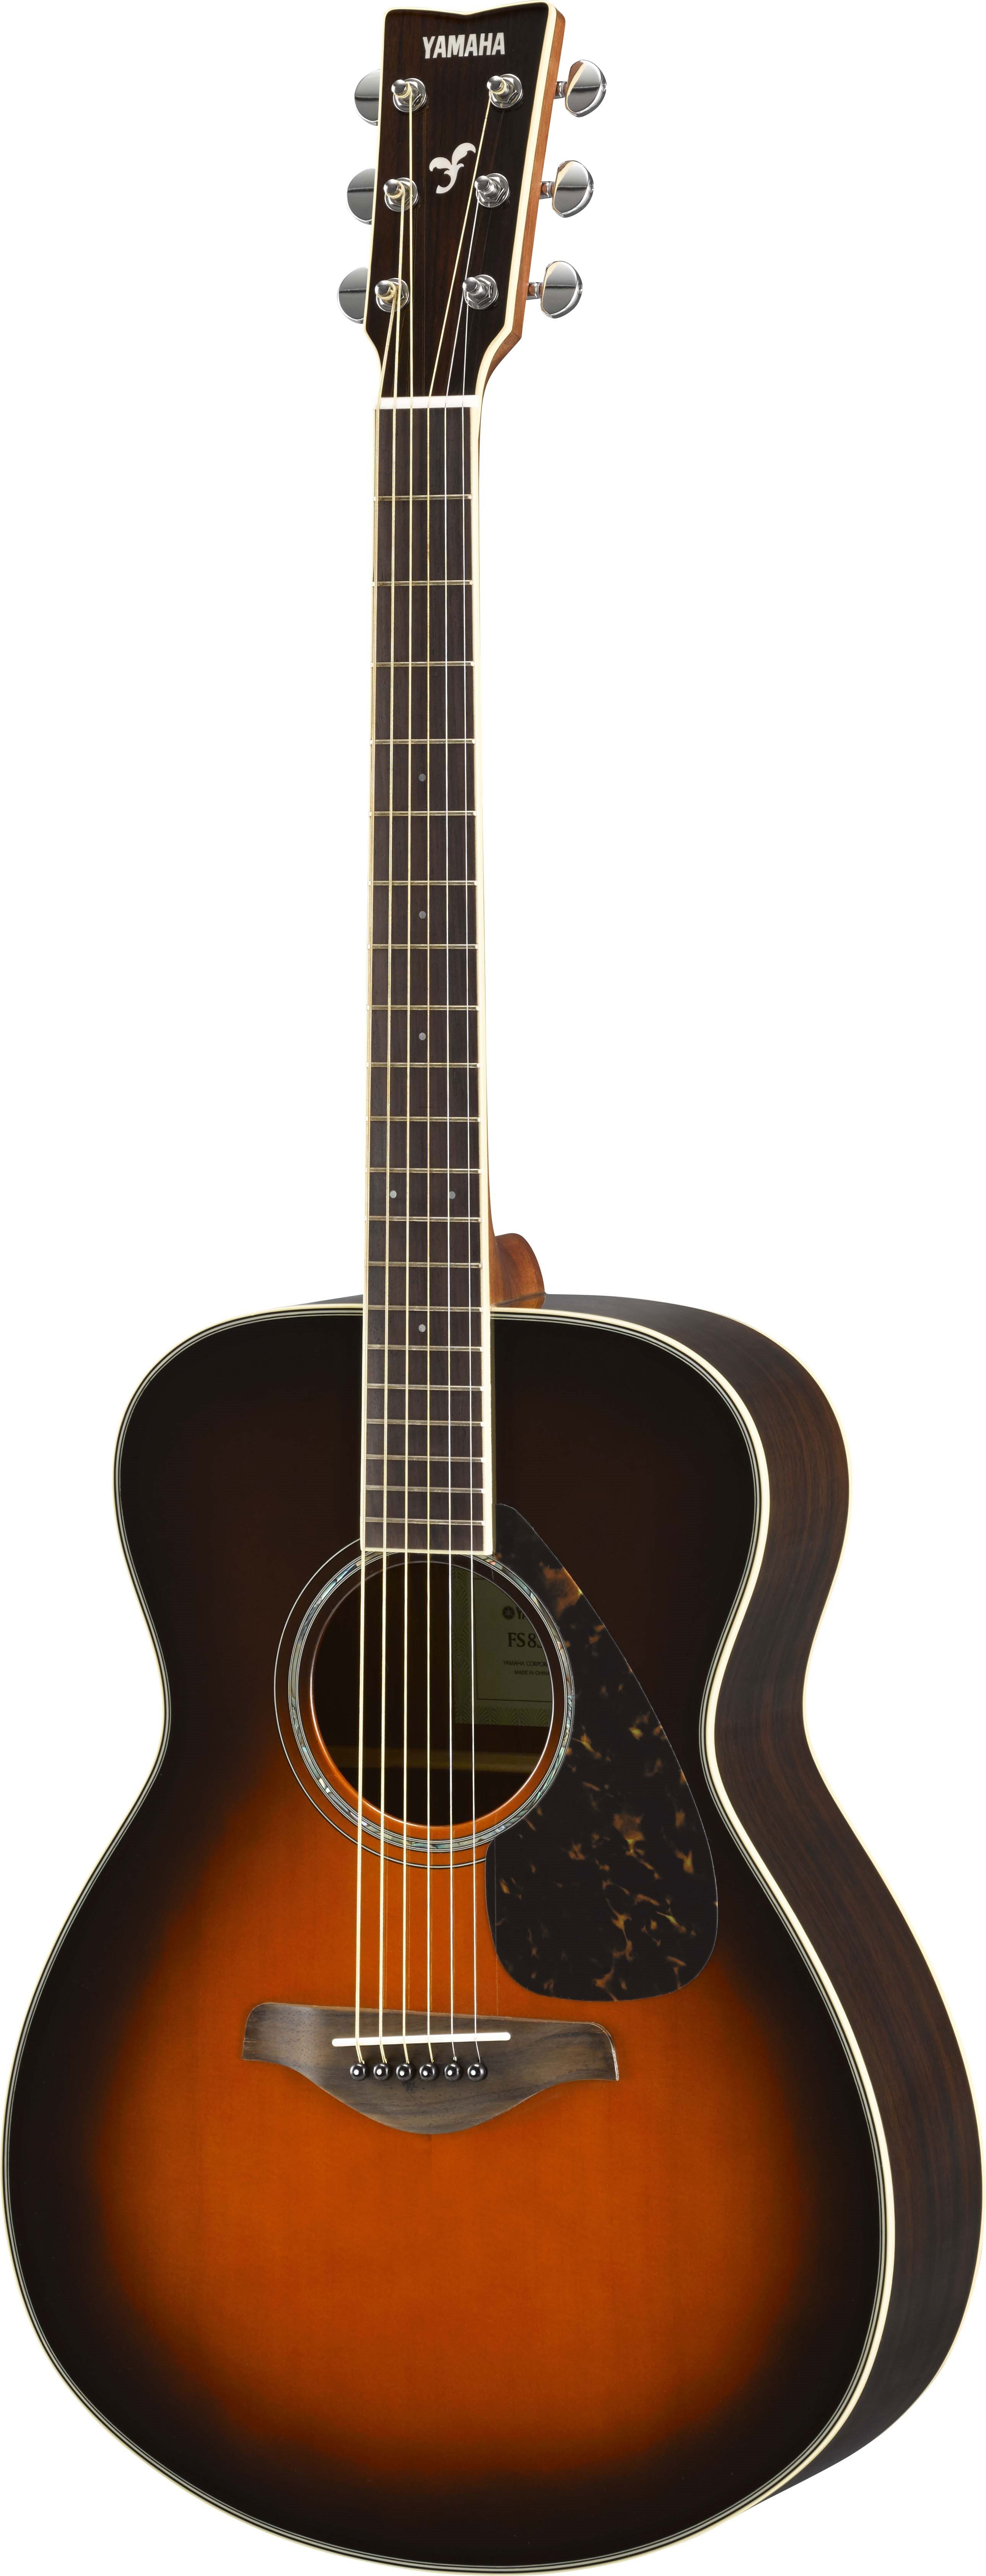 Yamaha FS830 Concert Small Body Acoustic Guitar with Rosewood Back + Sides - Dusk Sun Red for sale